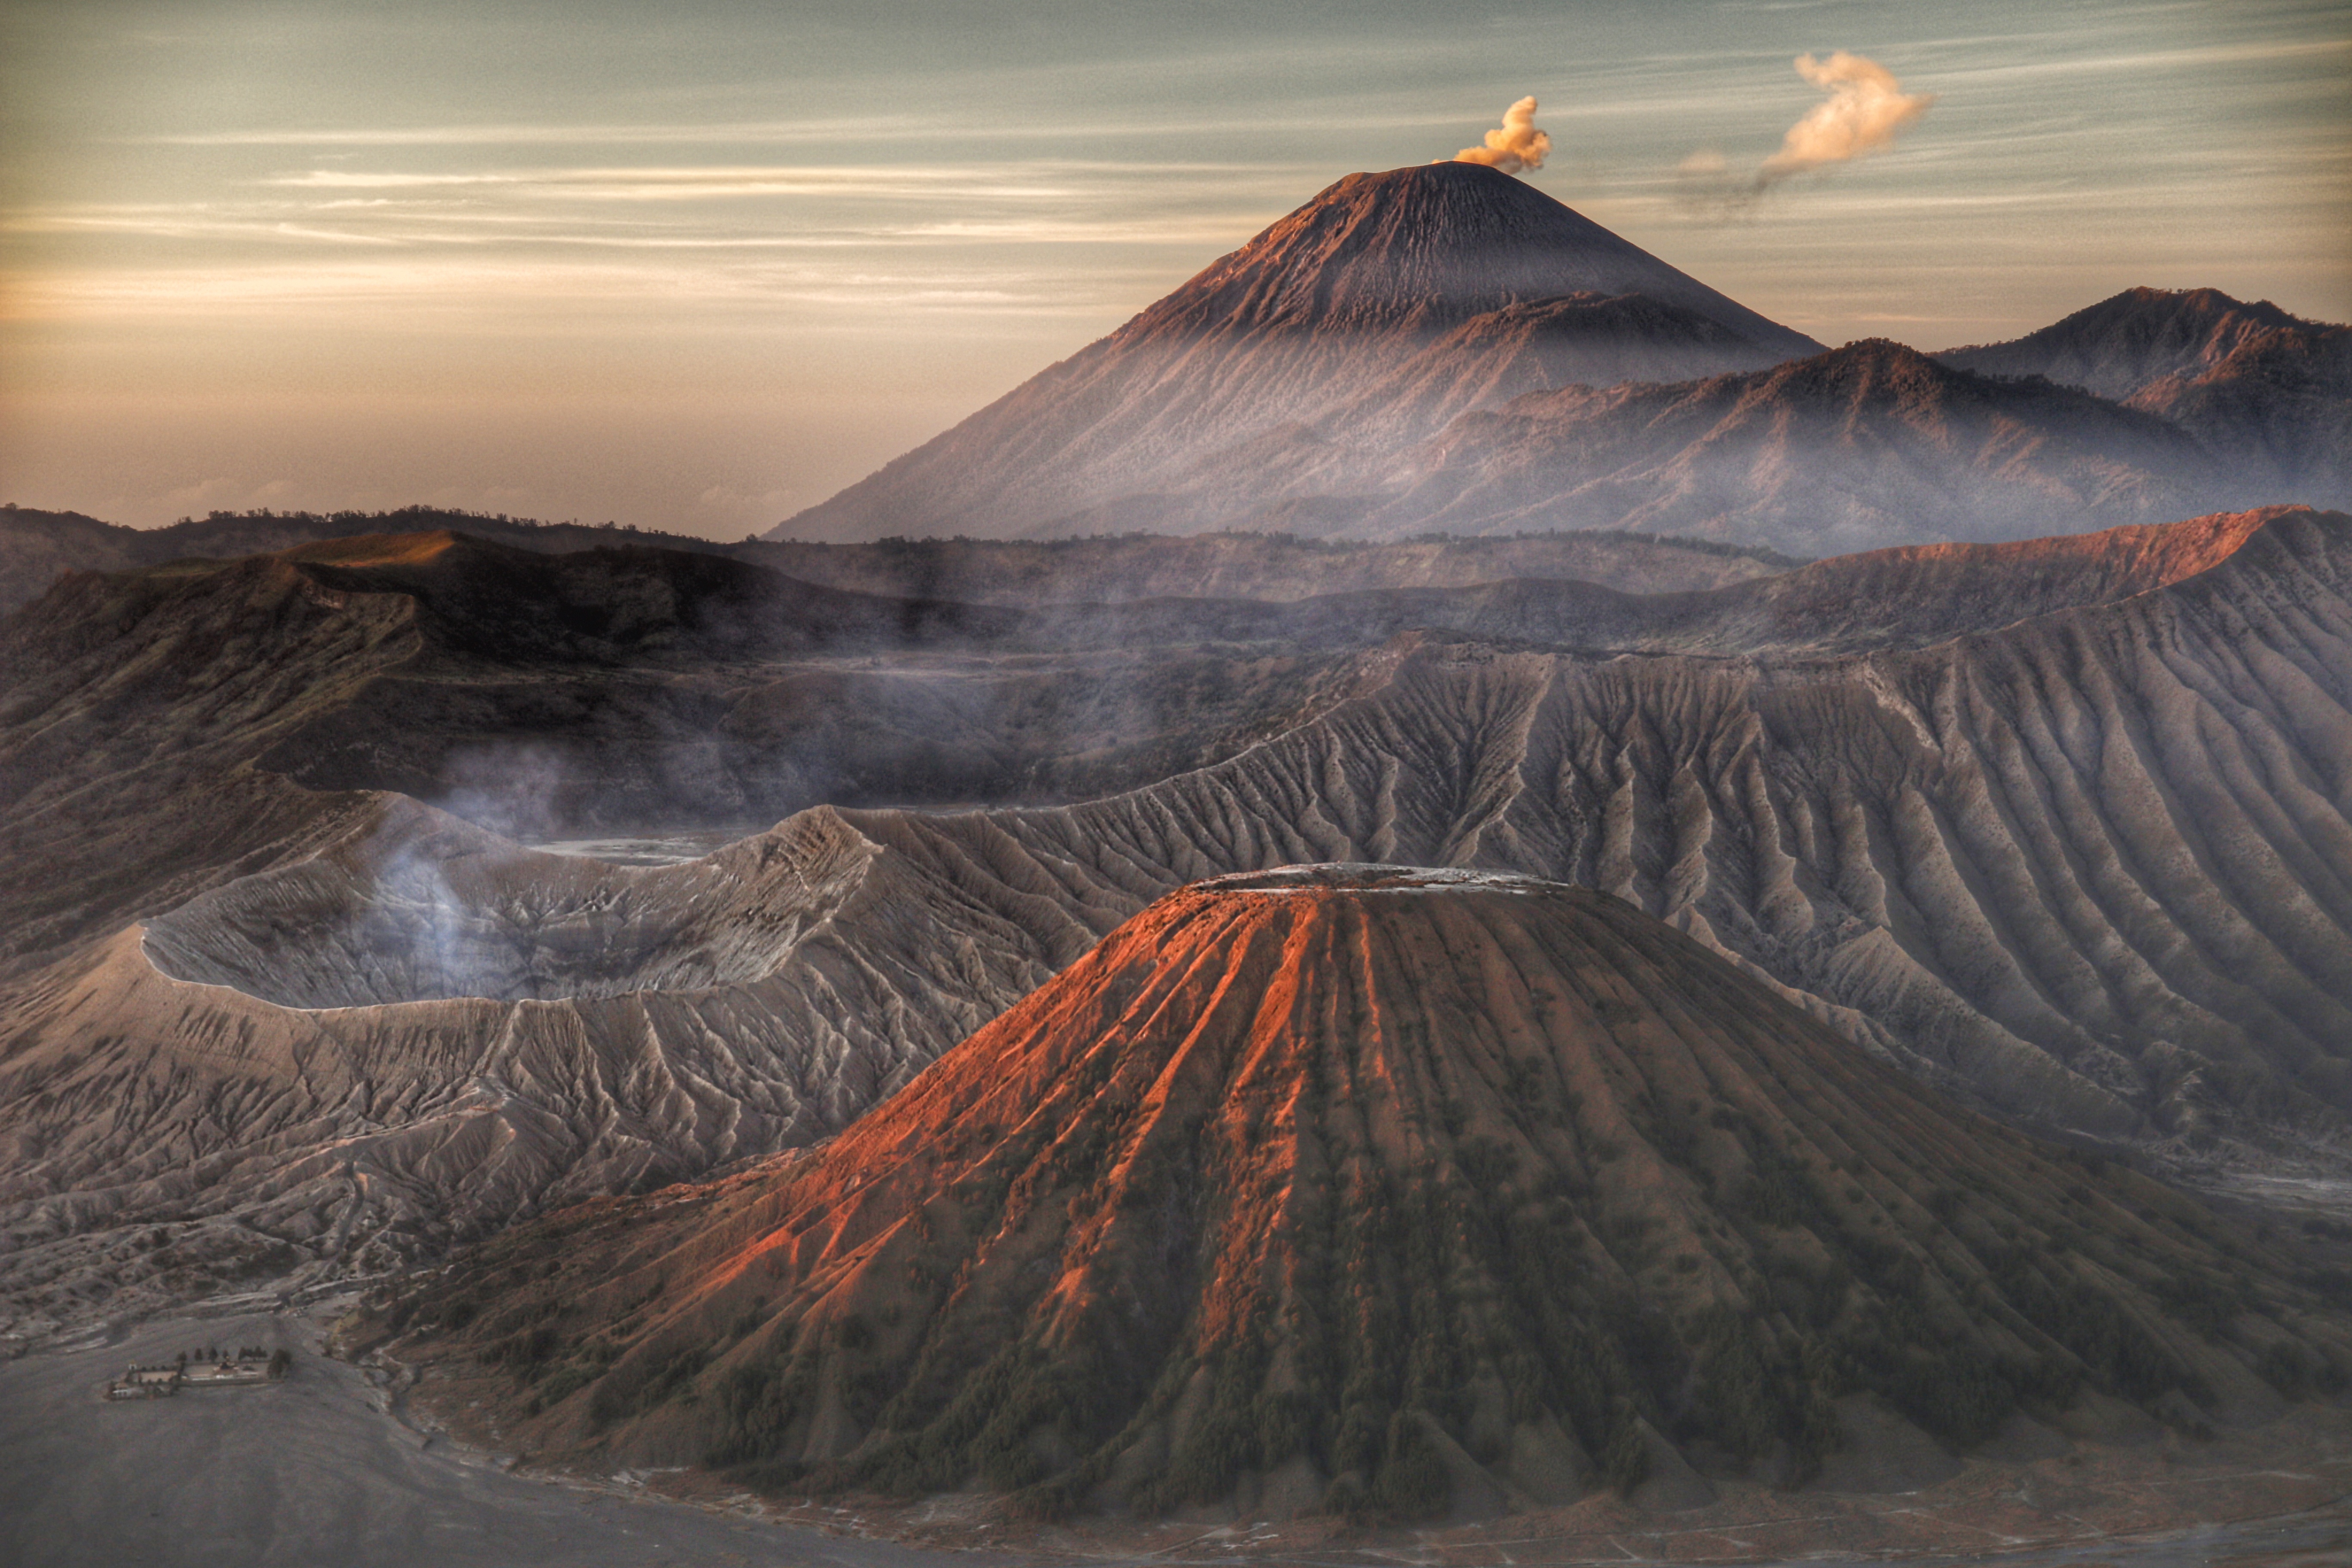 A volcano in Indonesia